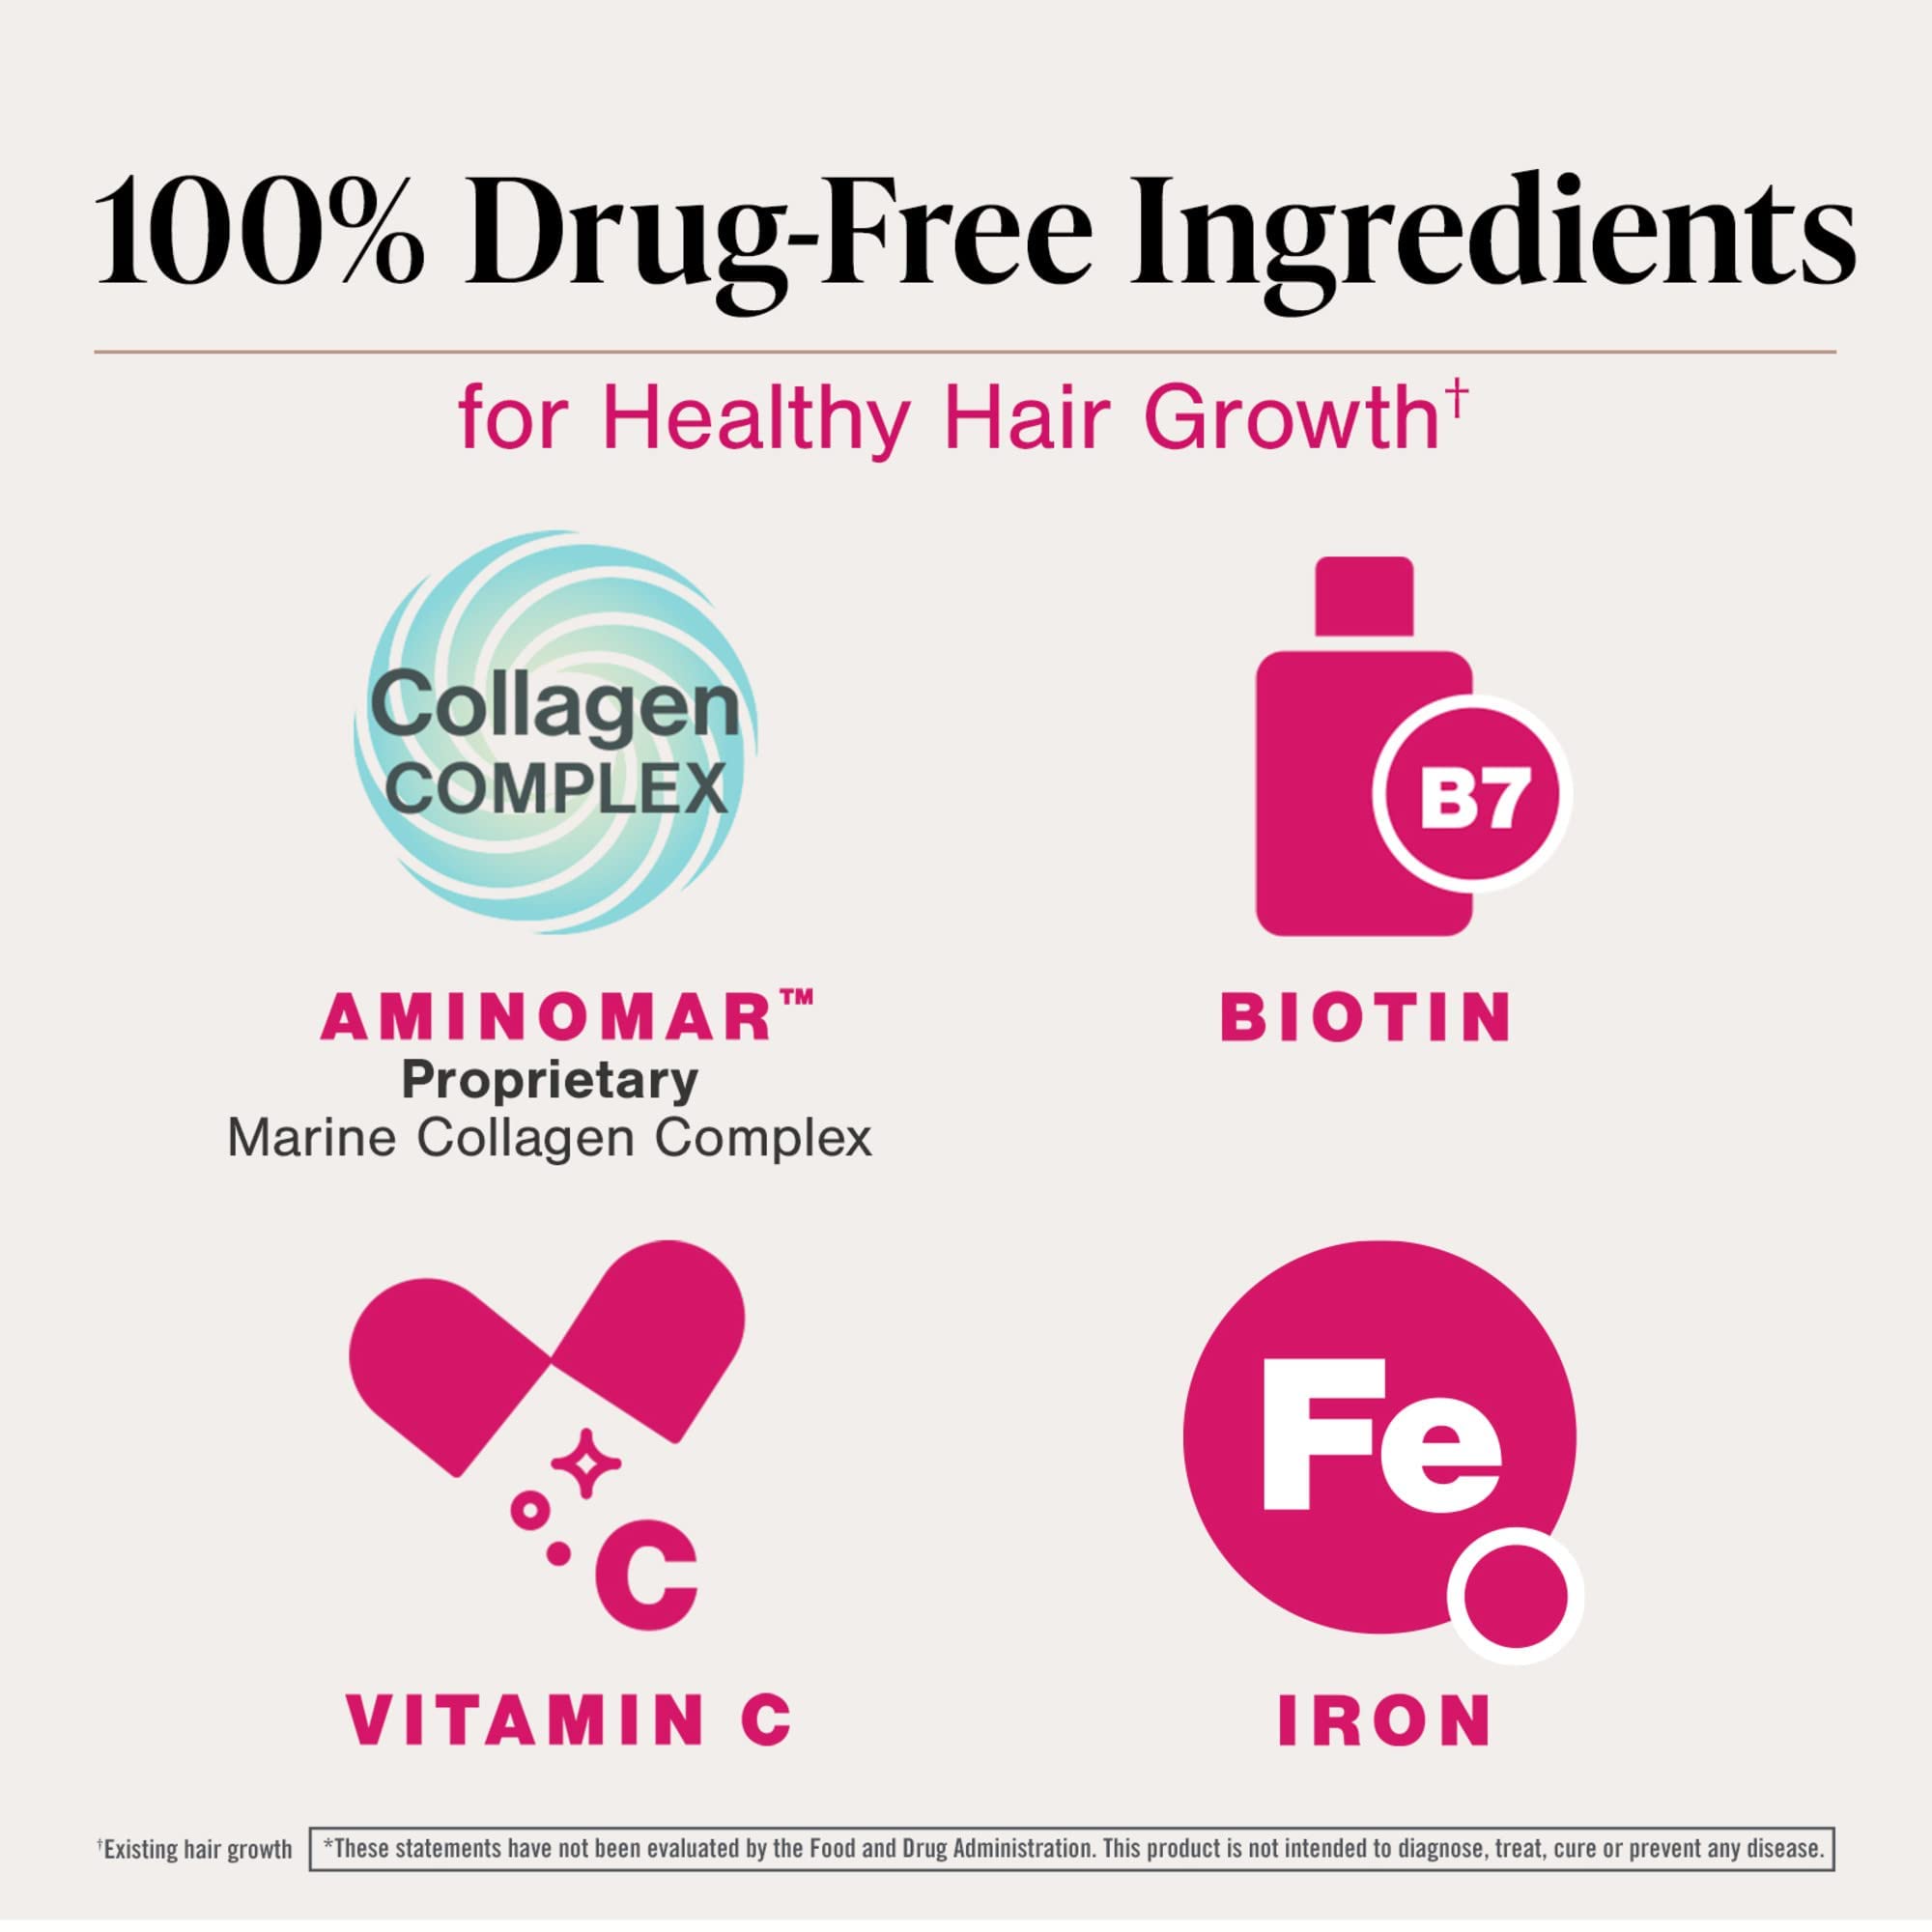 Viviscal Hair Growth Supplements for Women to Grow Thicker, Fuller Hair, Clinically Proven with Proprietary Collagen Complex, 60 Count (Pack of 1), 1 Month Supply